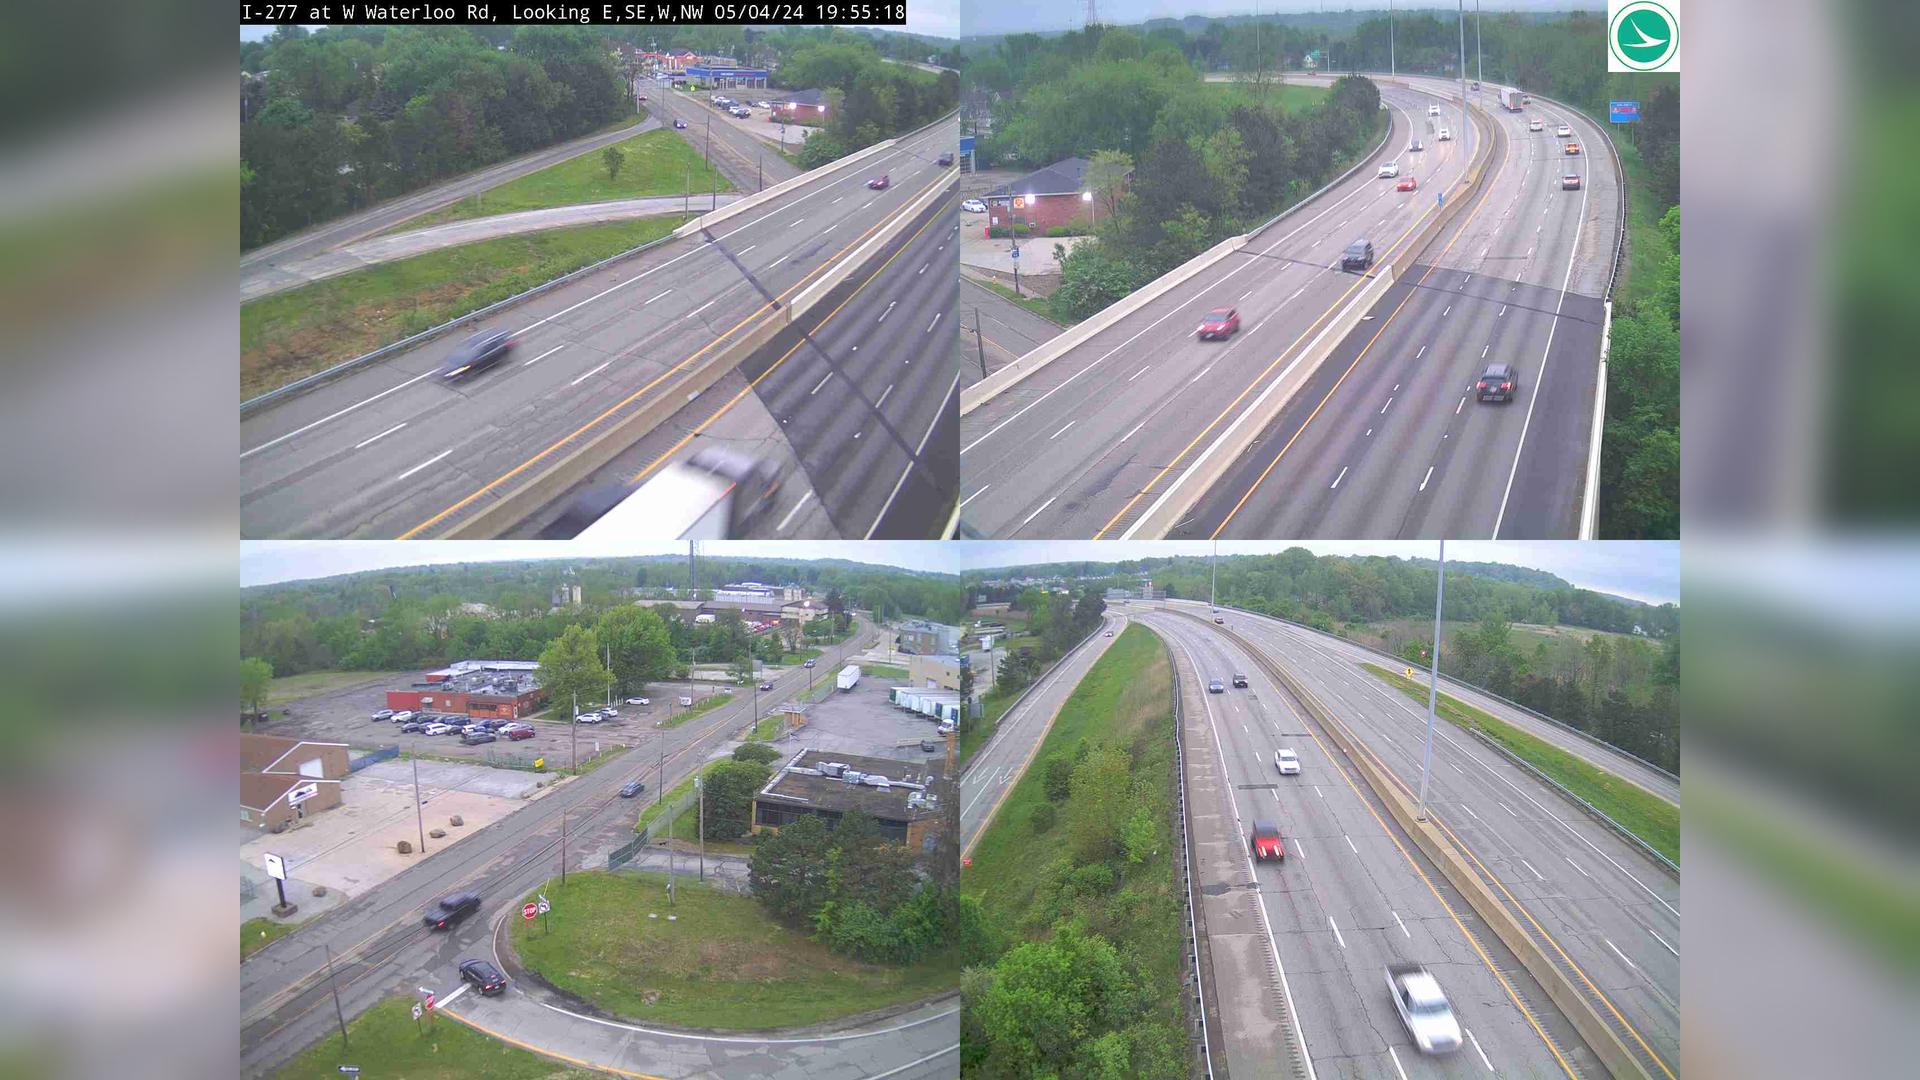 Traffic Cam Akron: I-277 at W Waterloo Rd Player